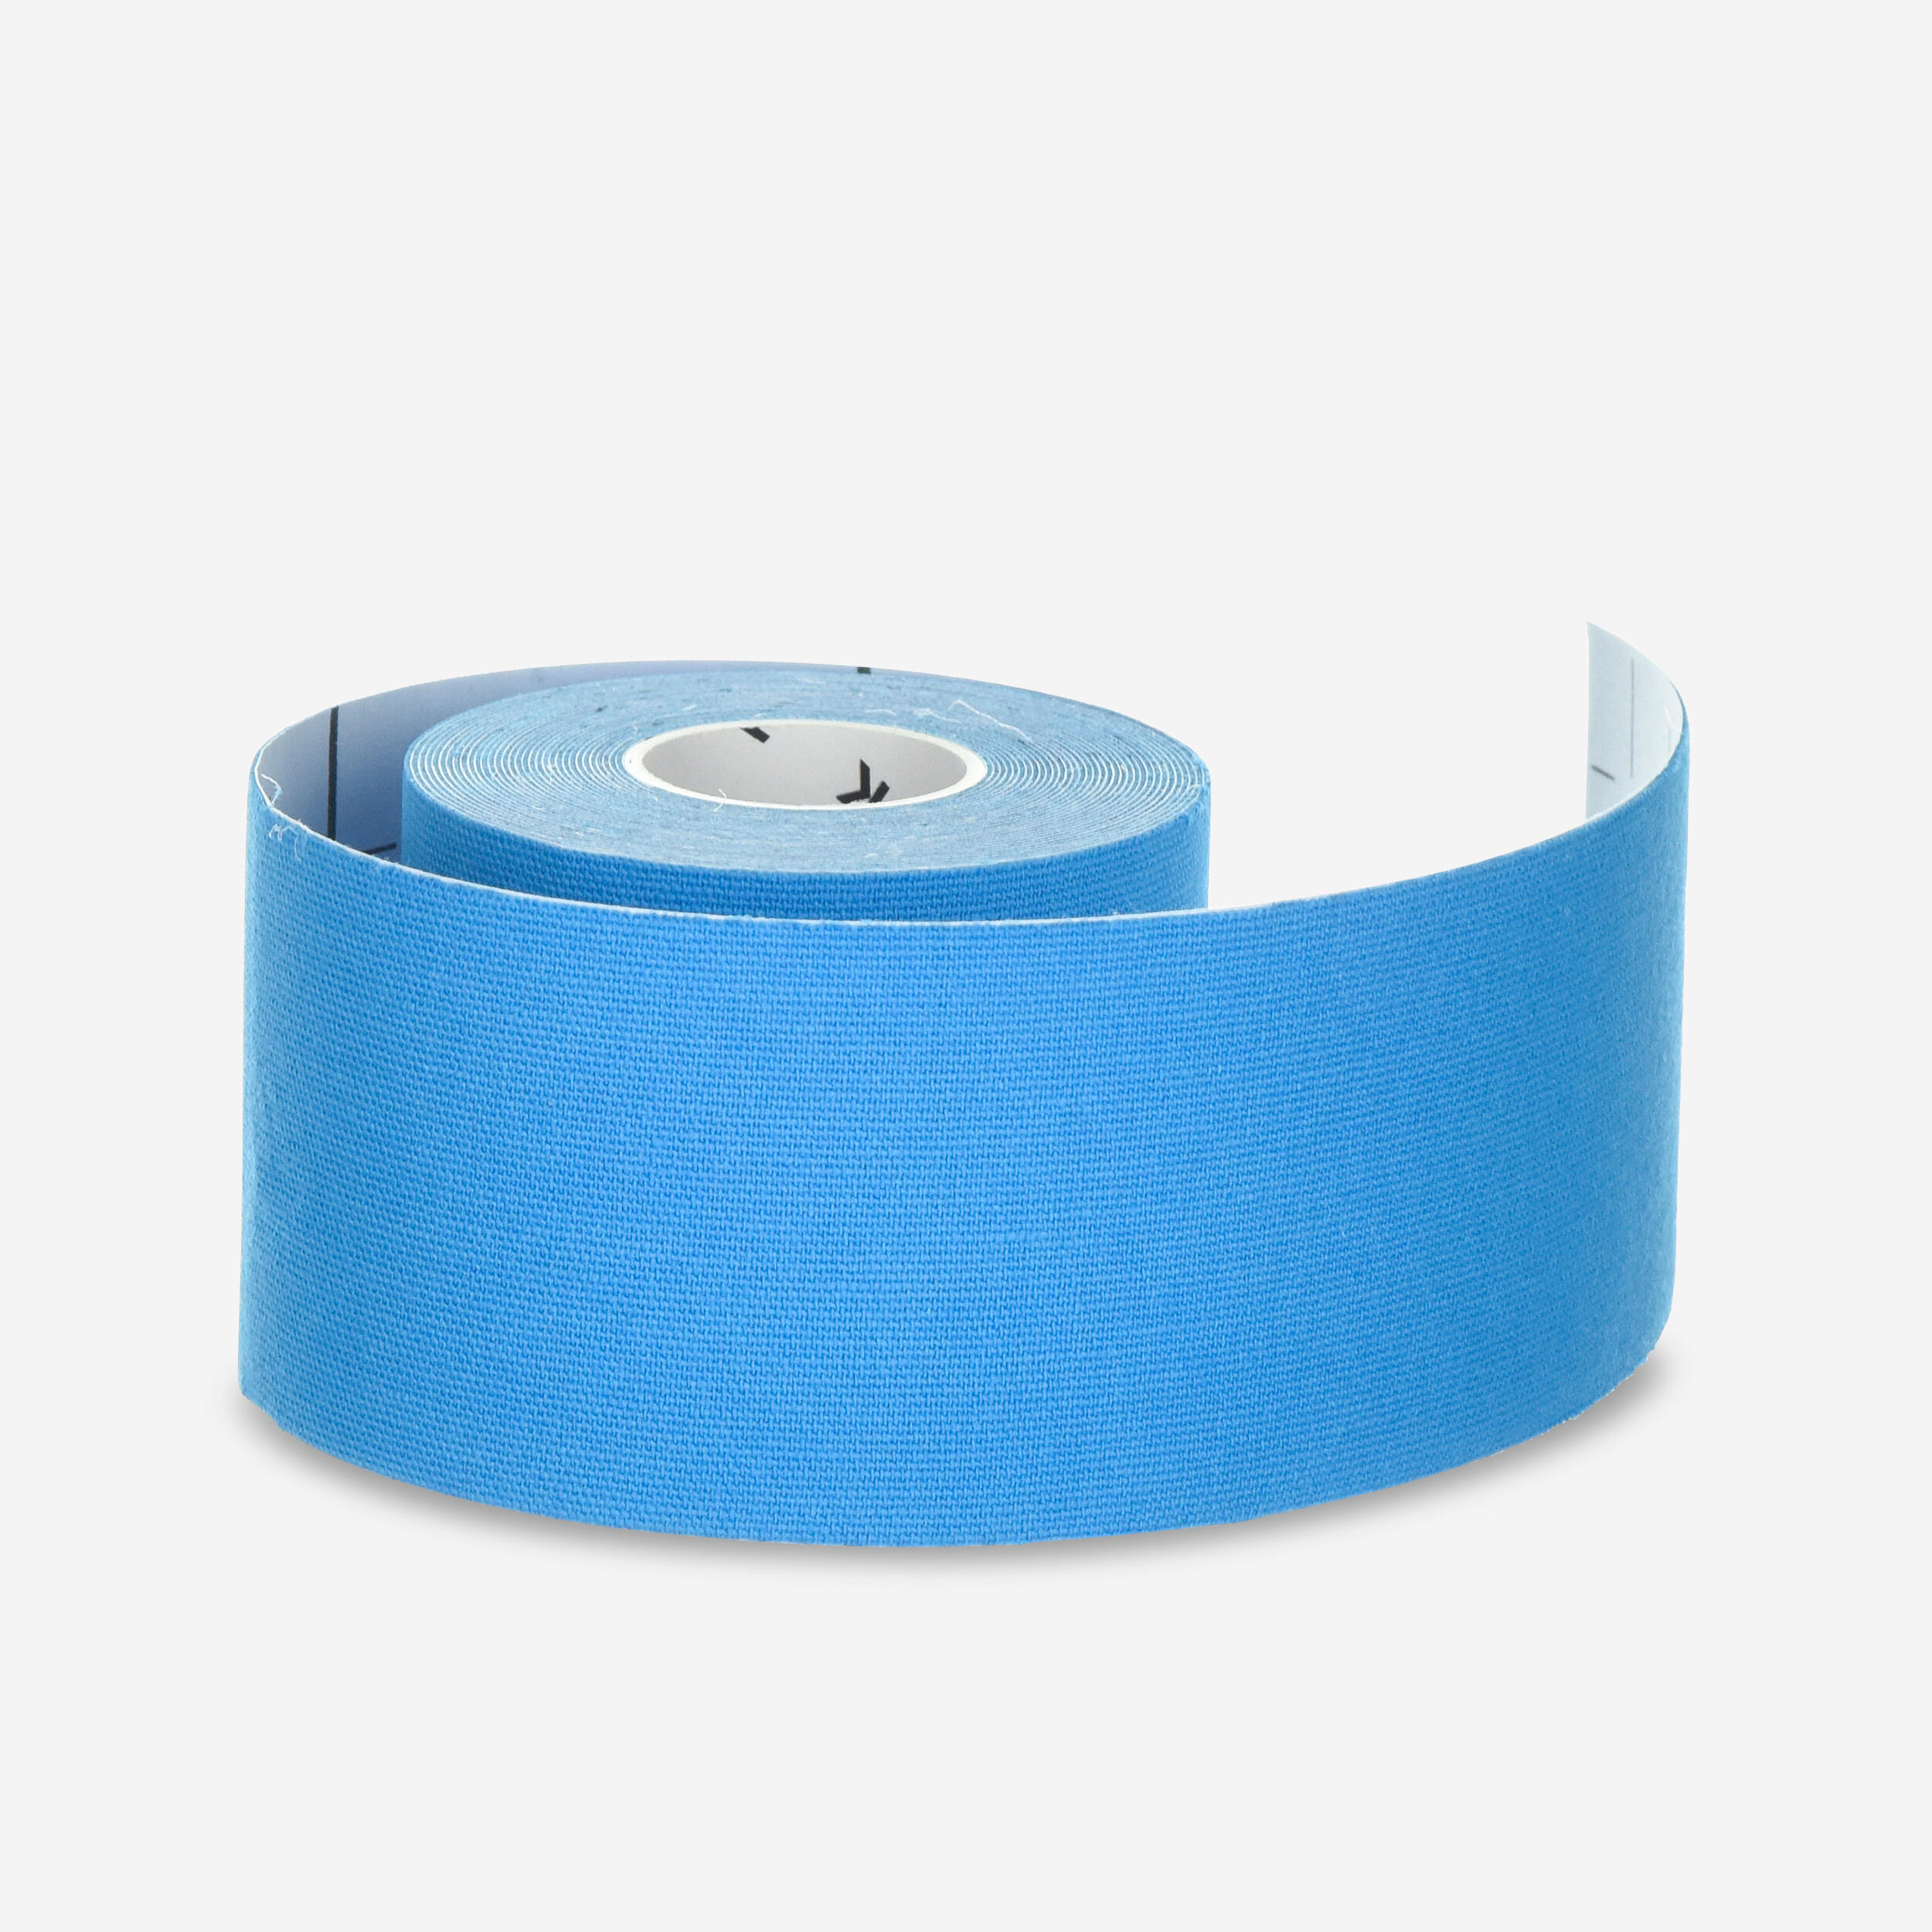 5 cm x 5 m Kinesiology Support Strap 